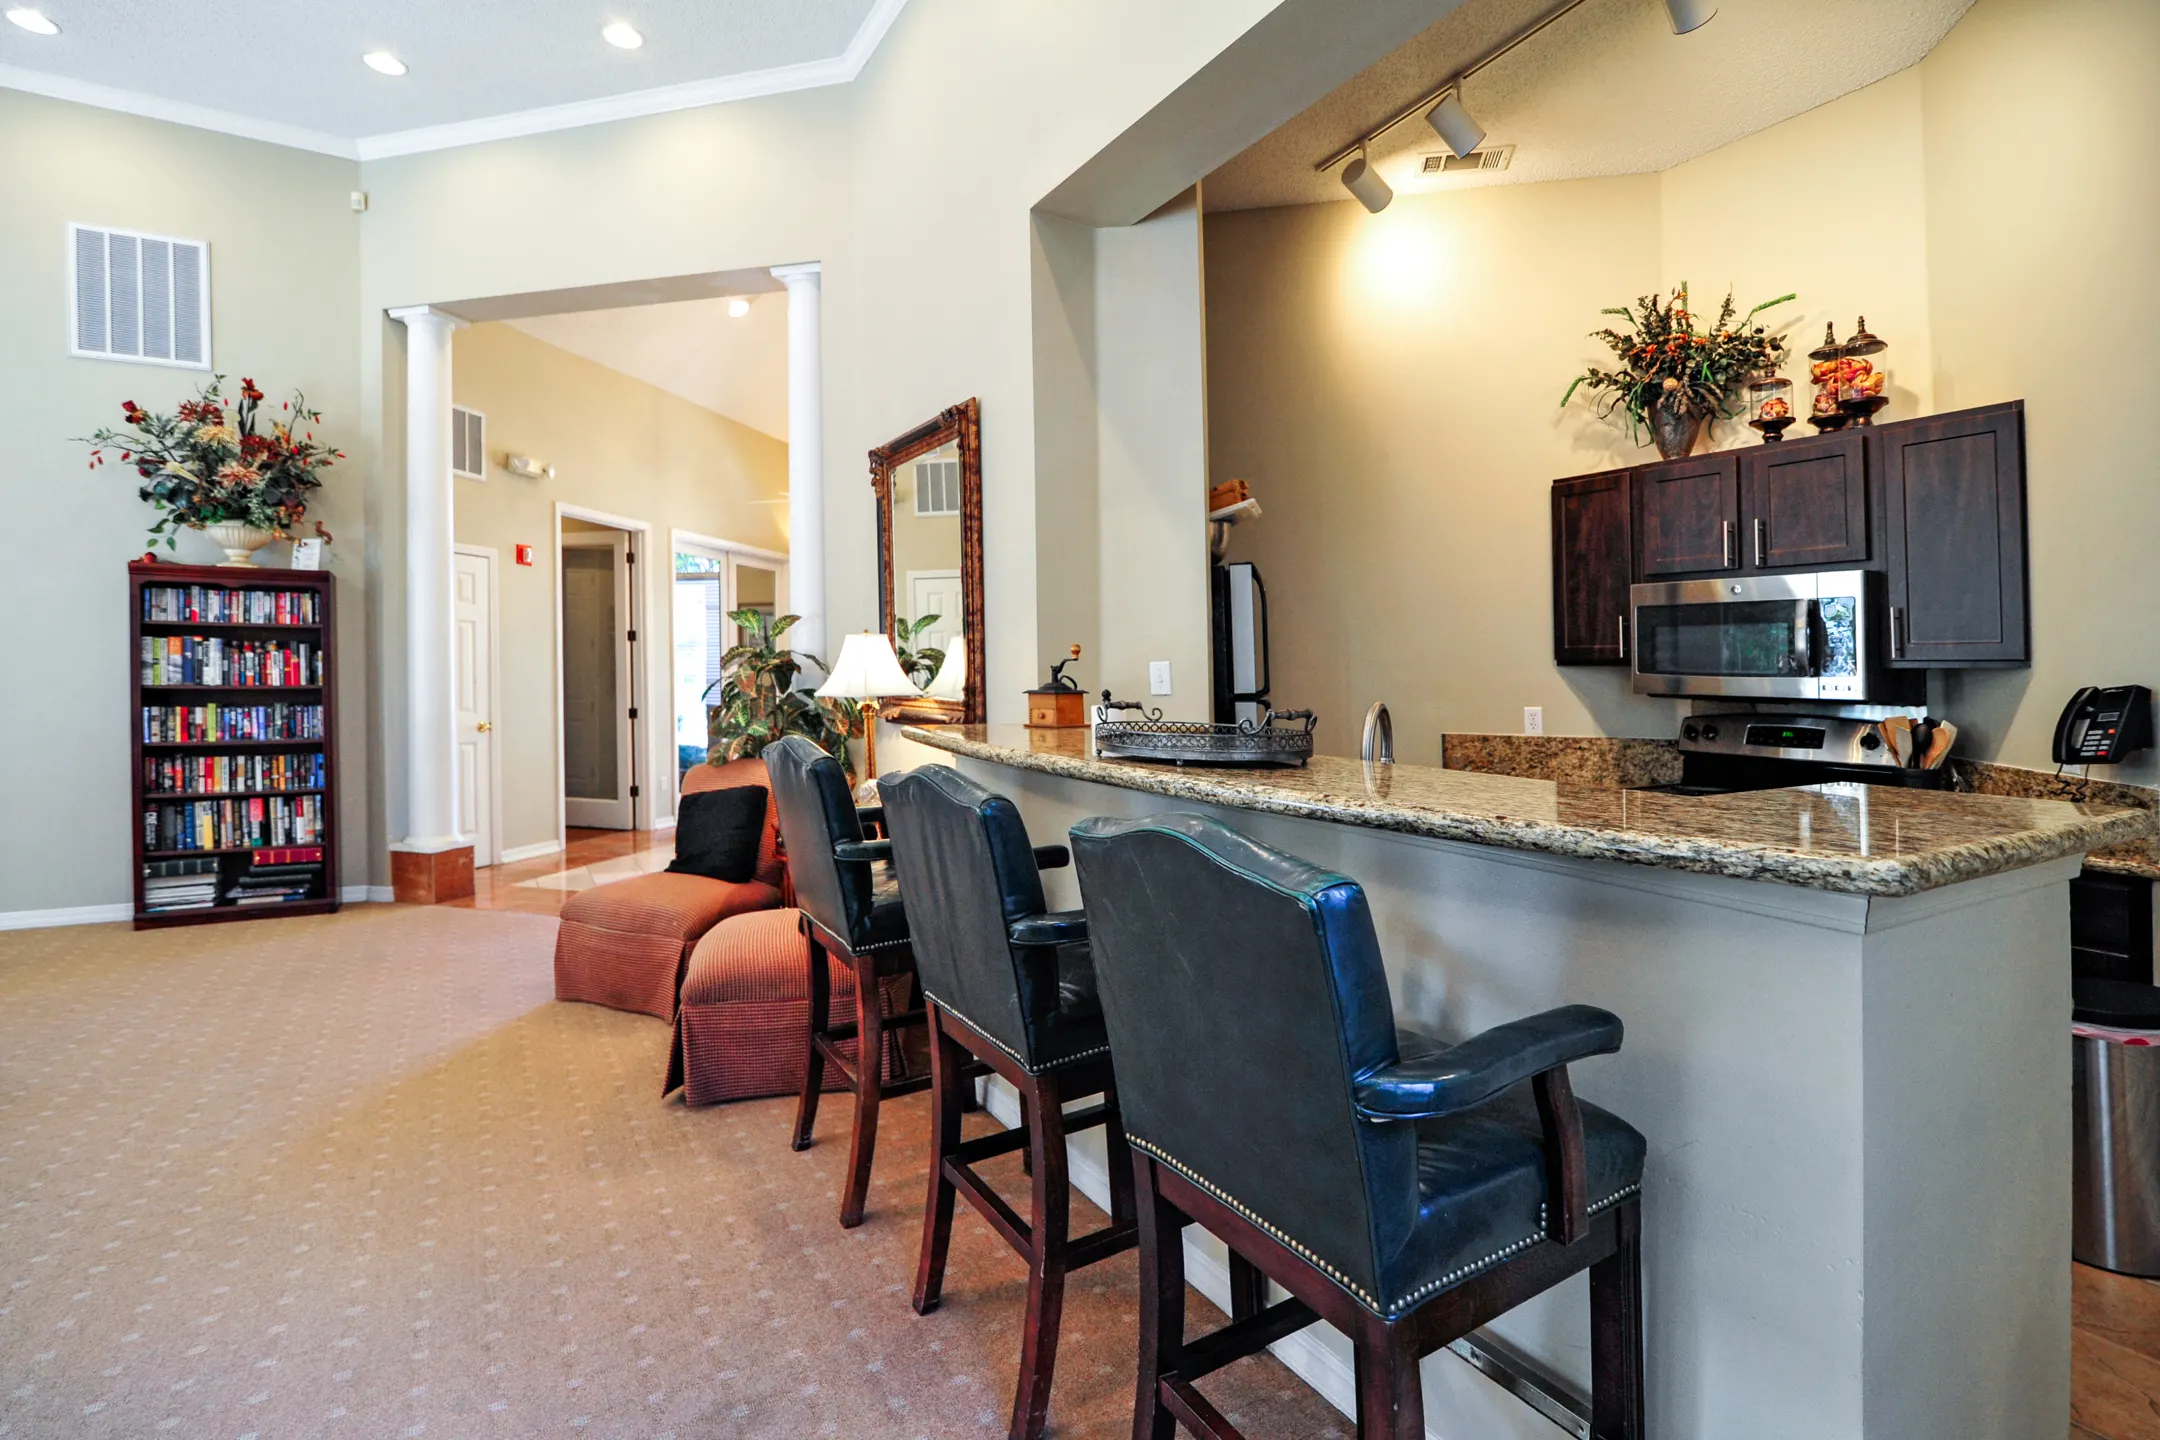 Dining Room - LaCrosse Apartments & Carriage Homes - Bossier City, LA